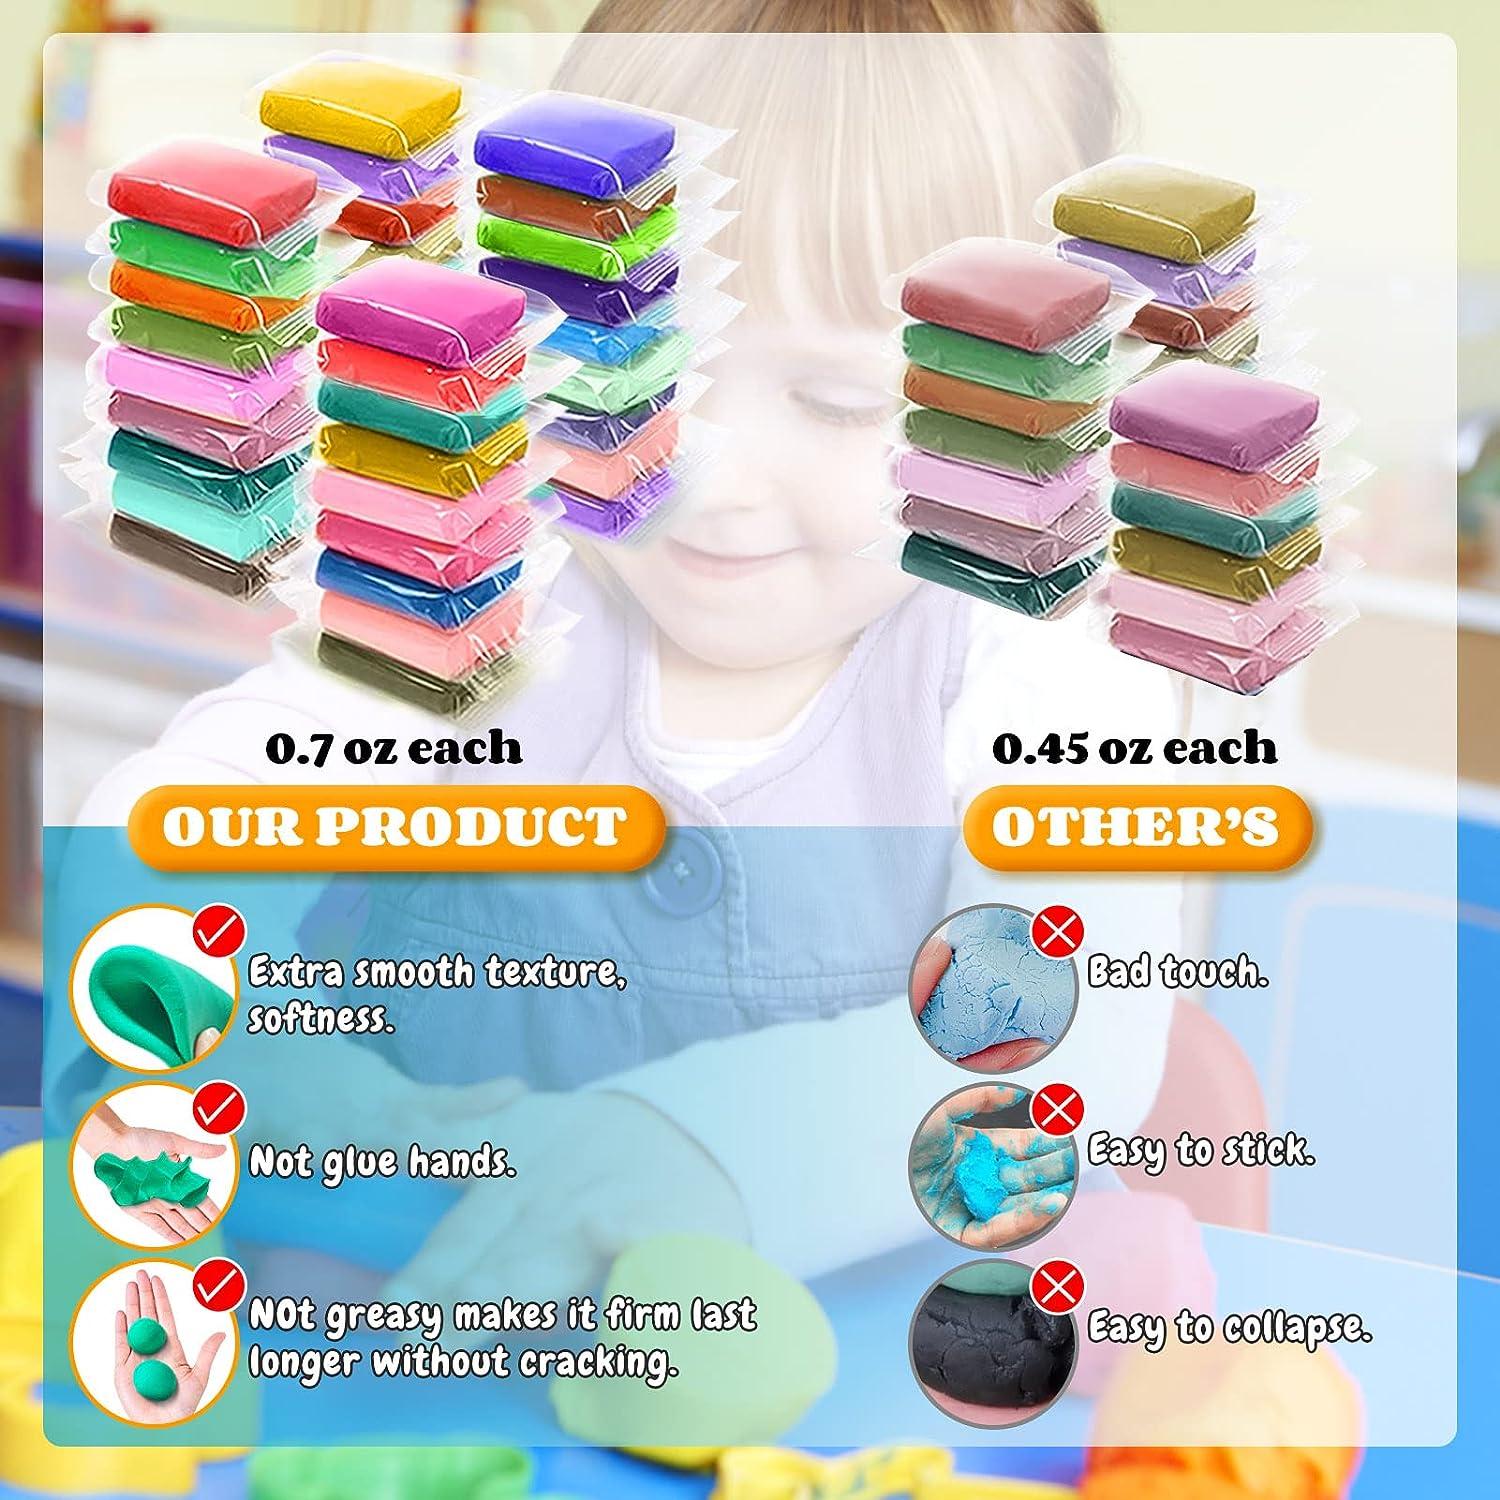 36 Colors Air Dry Clay,Magic Modeling Clay with Tools,Ultra Light 36